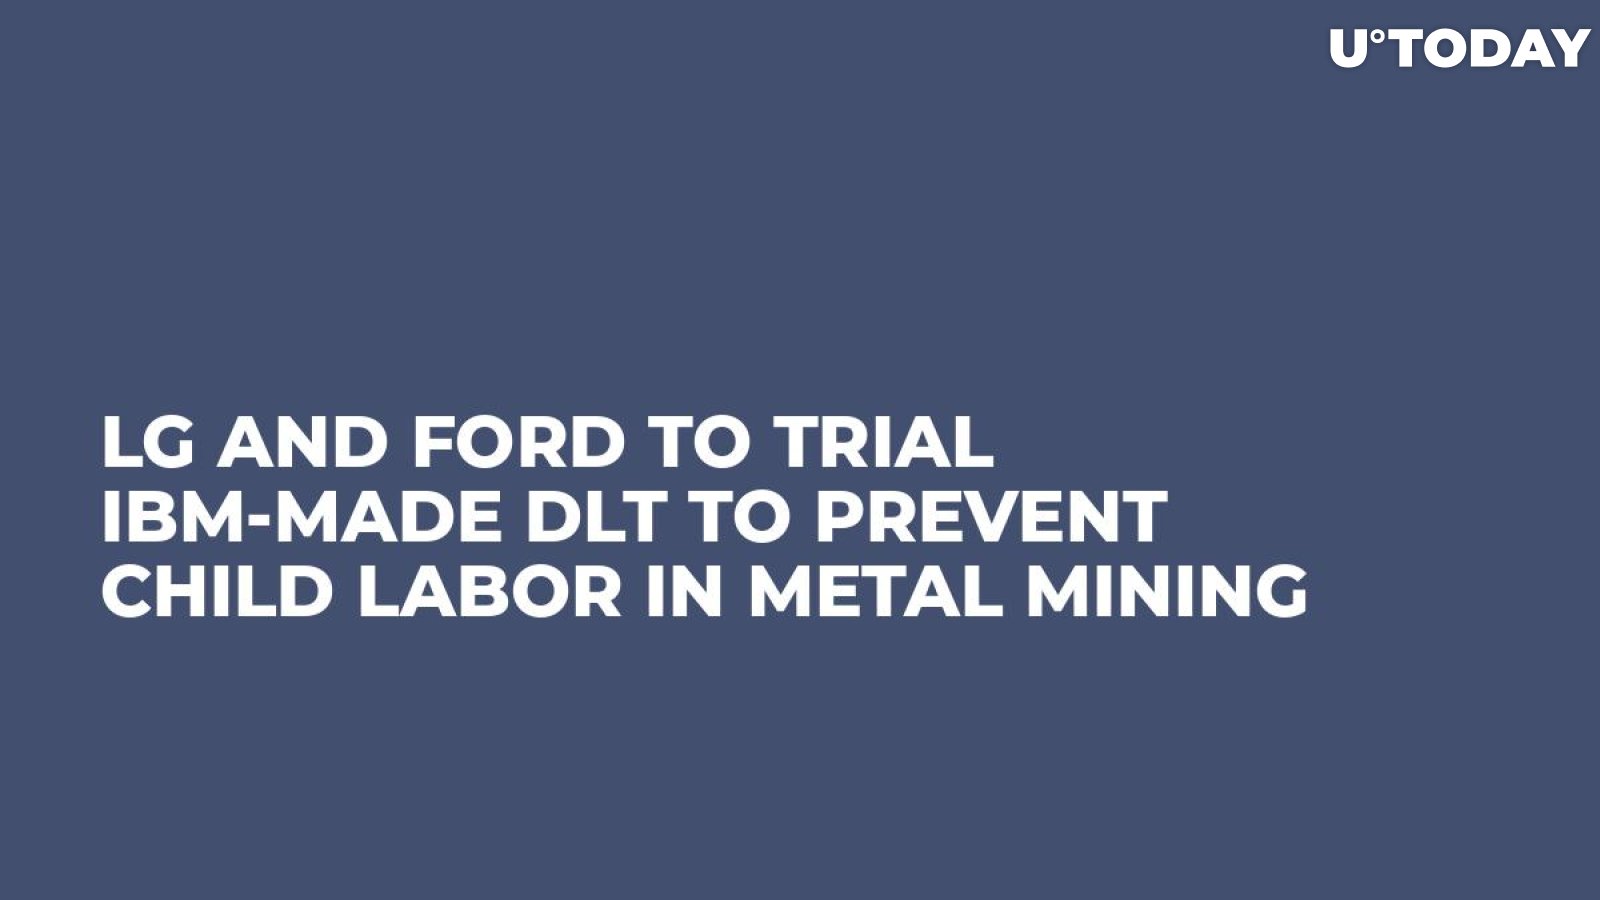 LG and Ford to Trial IBM-Made DLT to Prevent Child Labor in Metal Mining